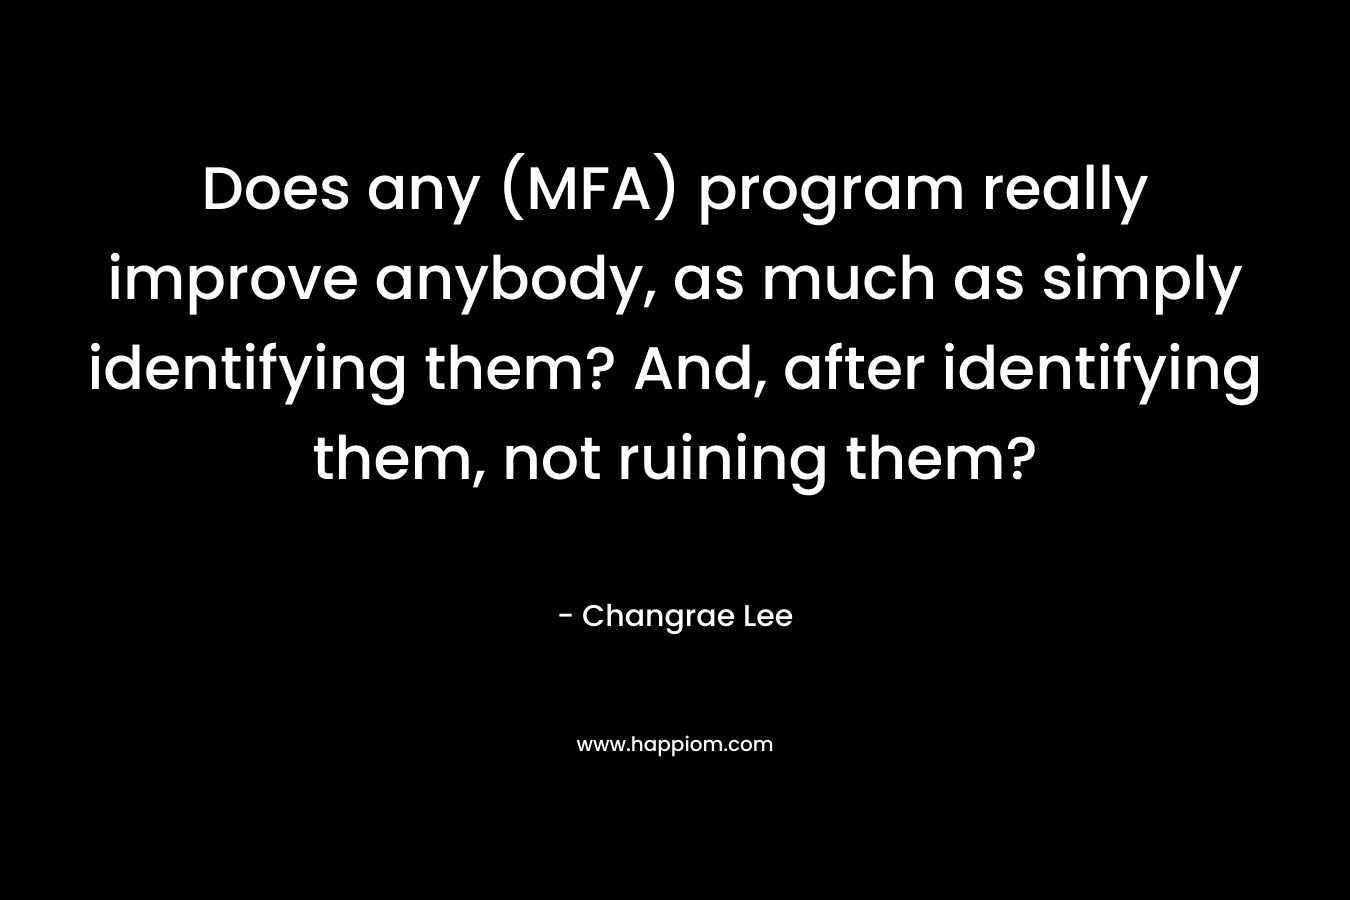 Does any (MFA) program really improve anybody, as much as simply identifying them? And, after identifying them, not ruining them? – Changrae Lee